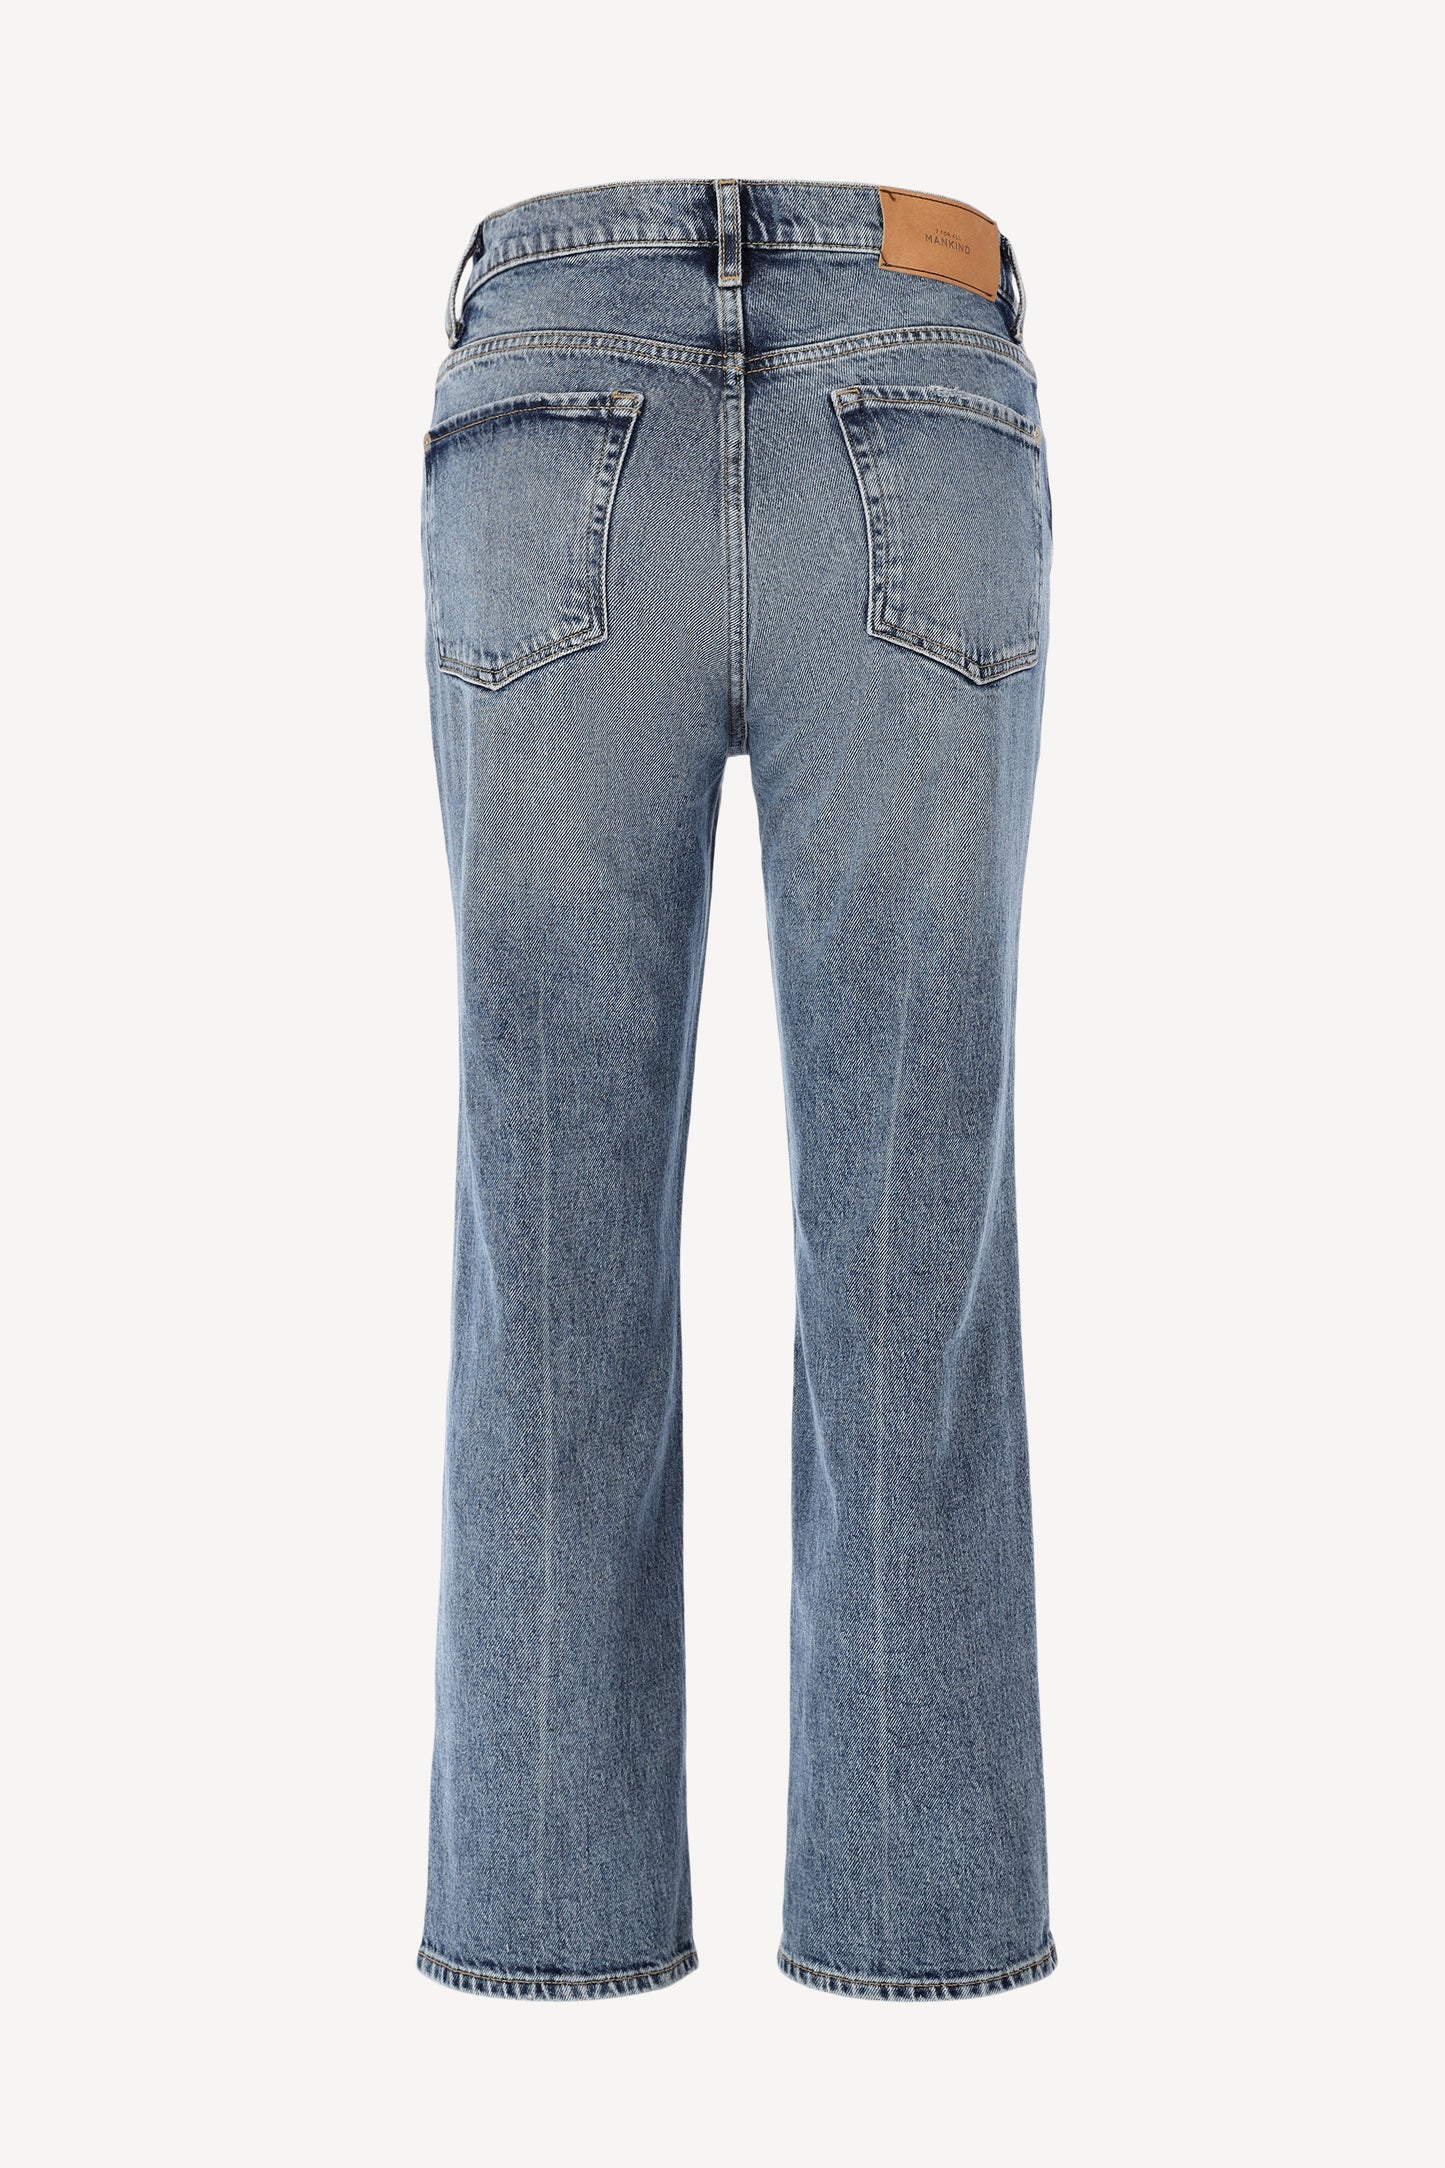 Jeans Logan Stovepipe in Light Blue7 For All Mankind - Anita Hass